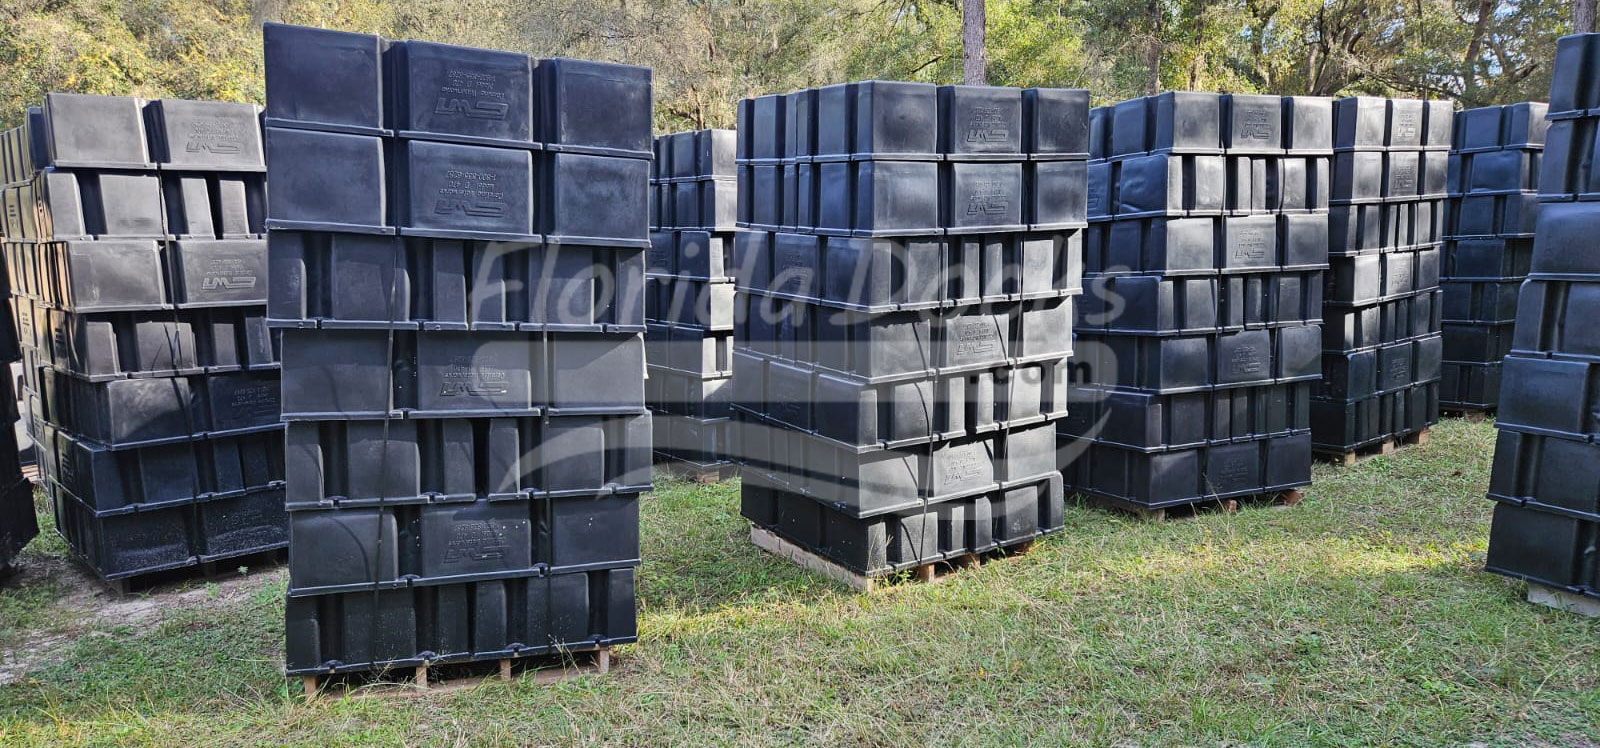 Dock Floats in West Palm Beach - carolina waterworks permafloats quality floating docks pallet pricing and bulk discounts - by Florida Docks 